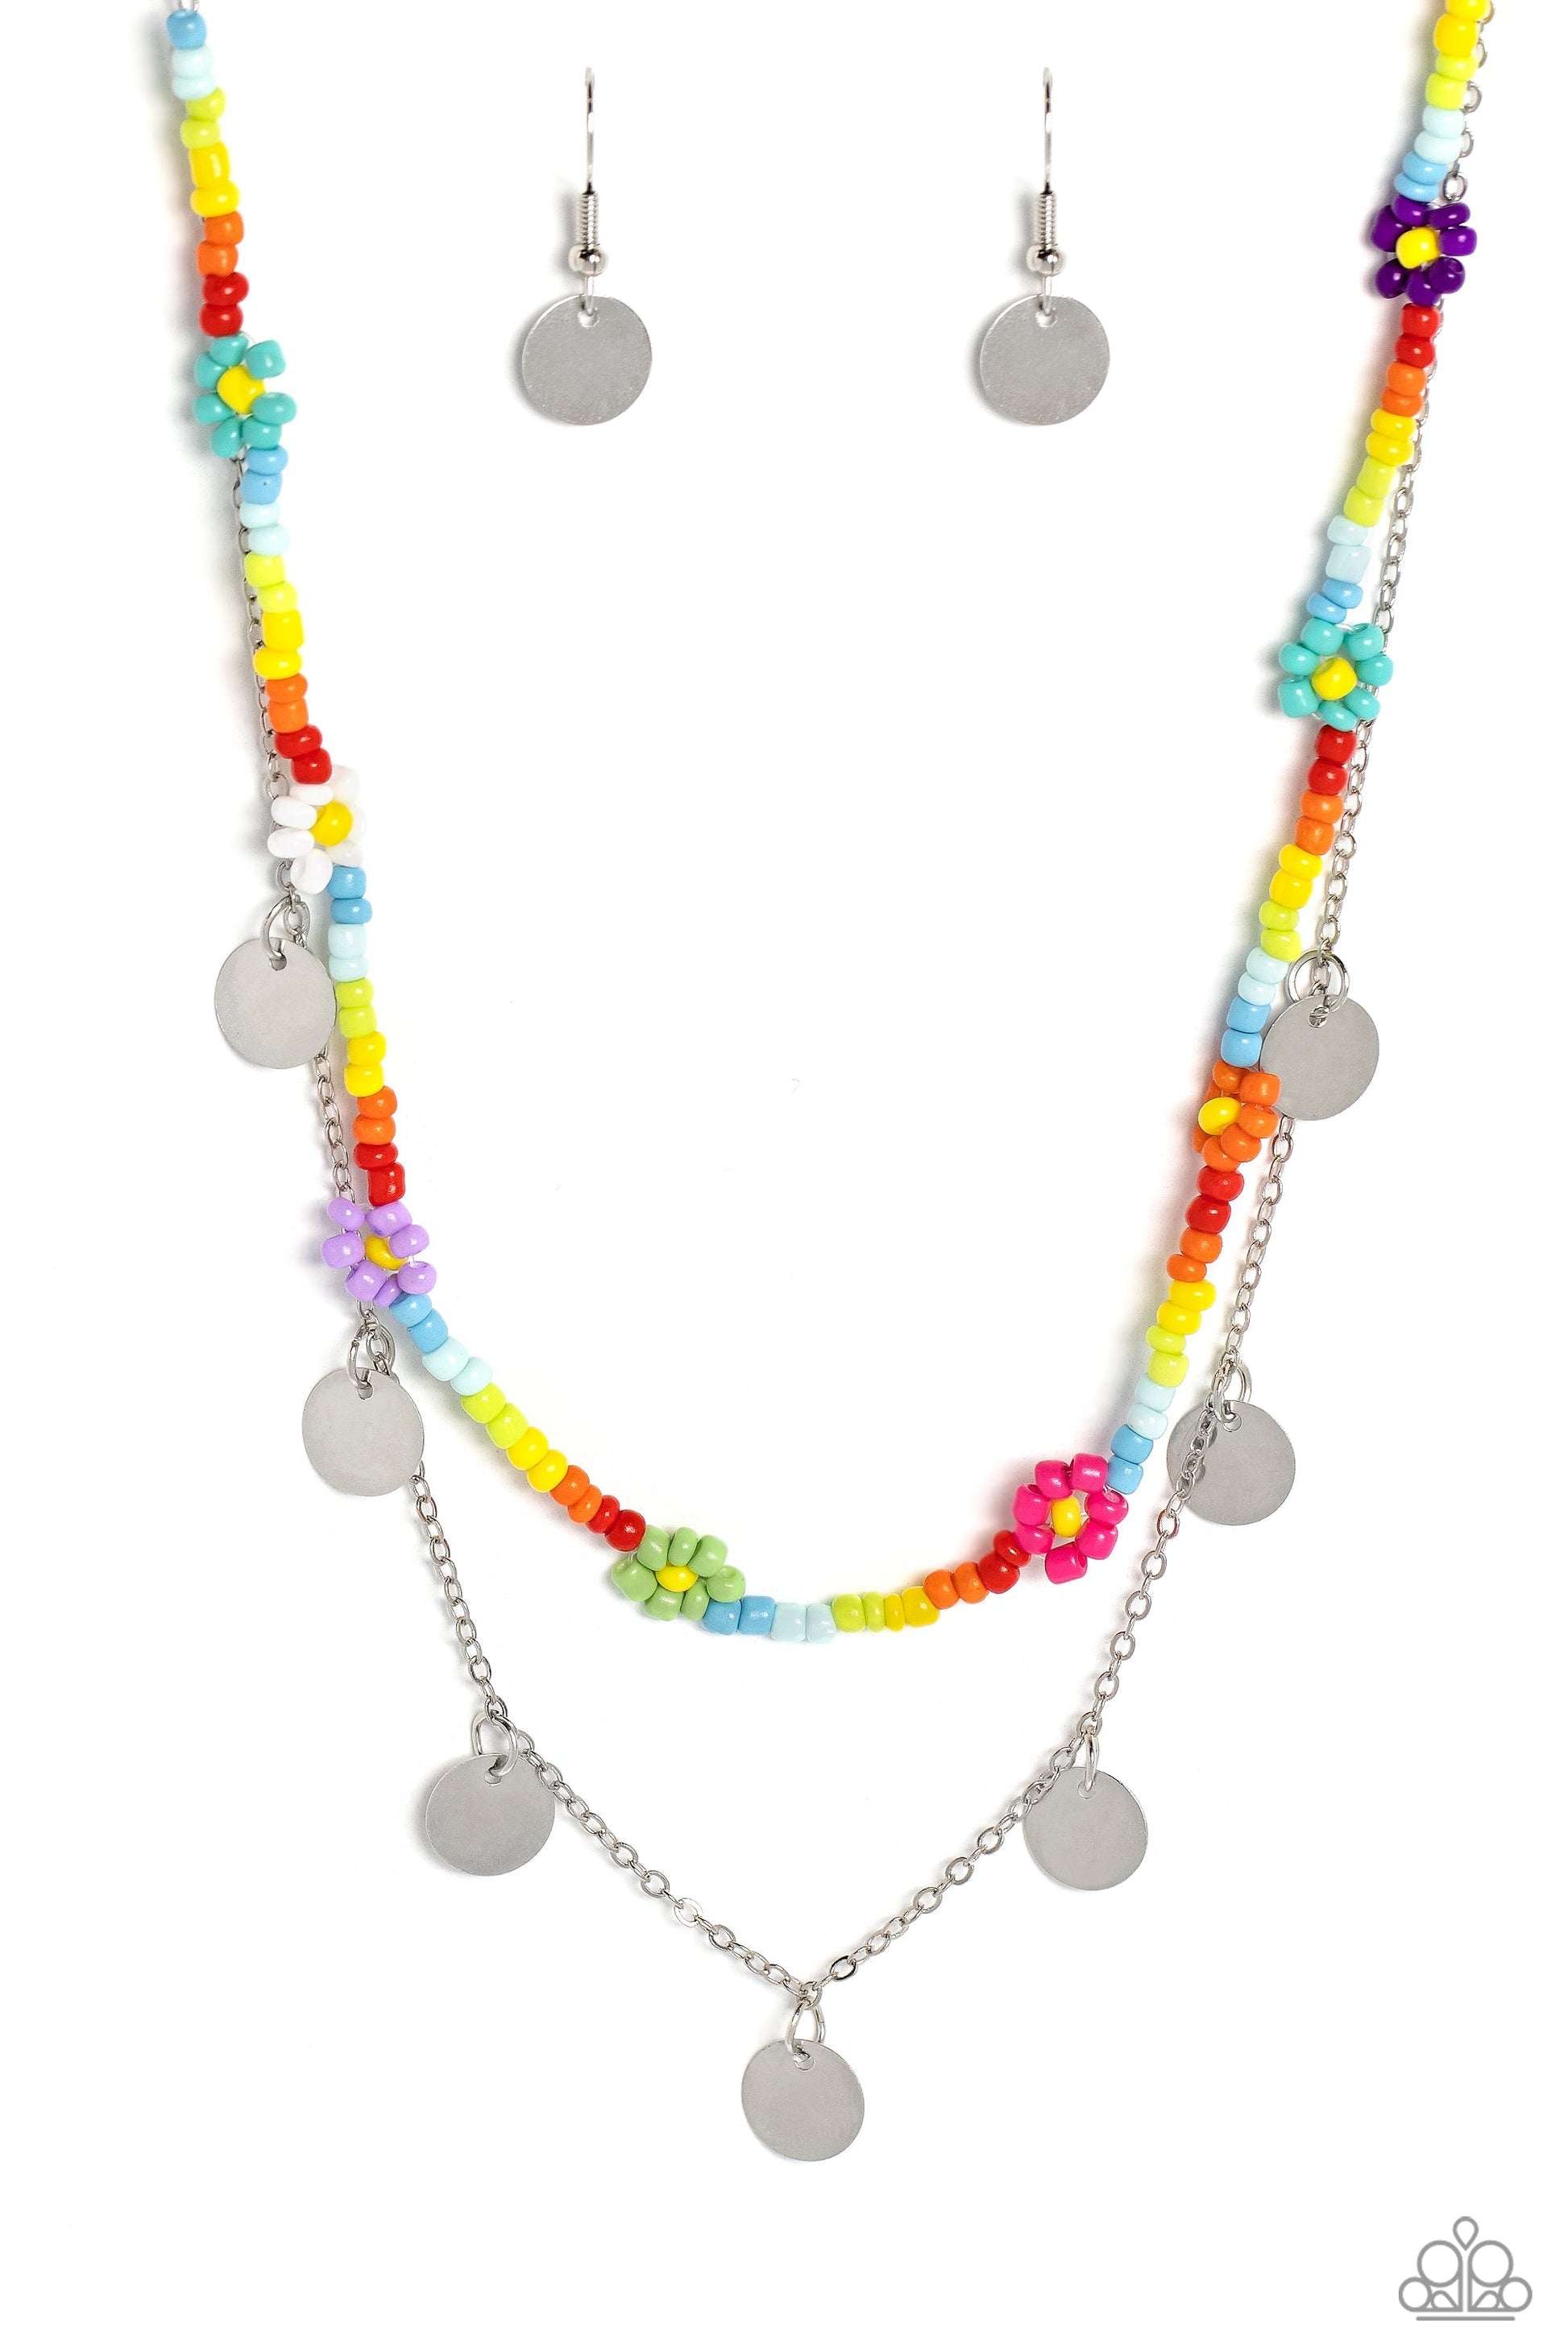 Rainbow Dash - Multi Color Necklace - Paparazzi Accessories - Multicolored seed beads are threaded along a wire, falling along the collar in a capricious pattern. Creating additional charm to the design, Pink Peacock, white, purple, blue, orange, green, purple, and baby pink seed bead flowers bloom amongst the bright pops of color. A delicate silver chain, infused with twinkling silver discs, layers with the colorful beads for a sassy, yet sweet, combo.